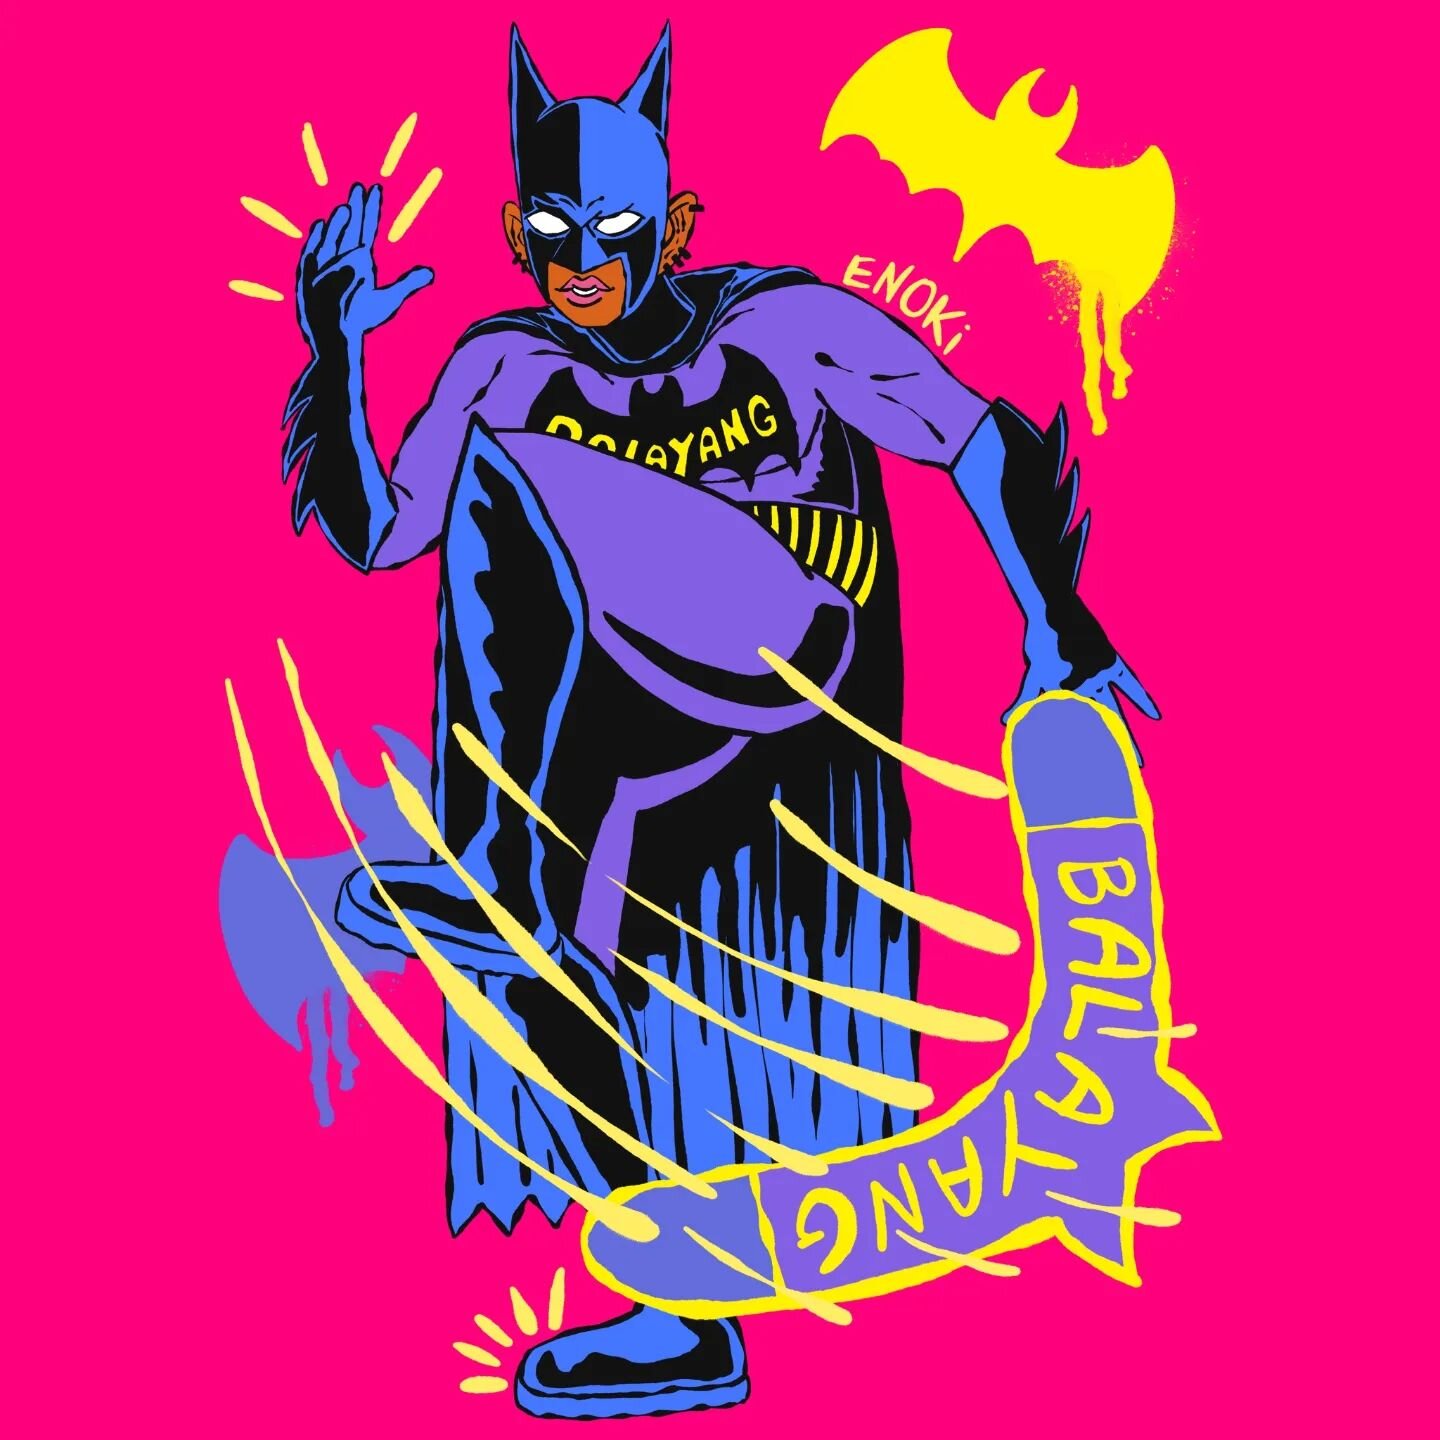 I thought it would be fun to draw Batman but base it off @gamminthreads &quot;Balayang&quot; t-shirt design 

#indigenousartist #melbournebasedartist #gamminthreads #batman #balayang